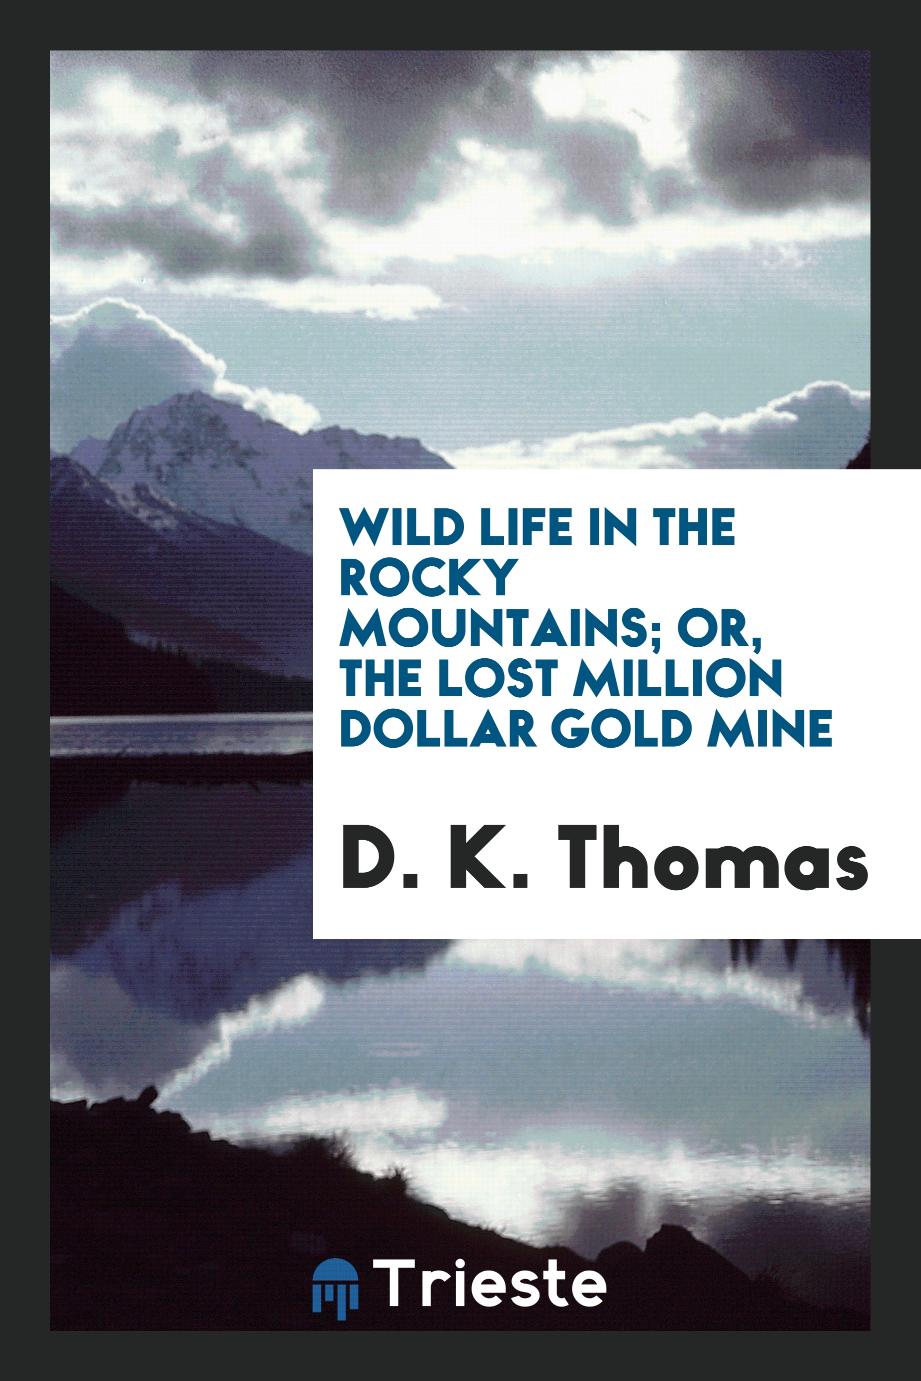 Wild life in the Rocky Mountains; or, The lost million dollar gold mine